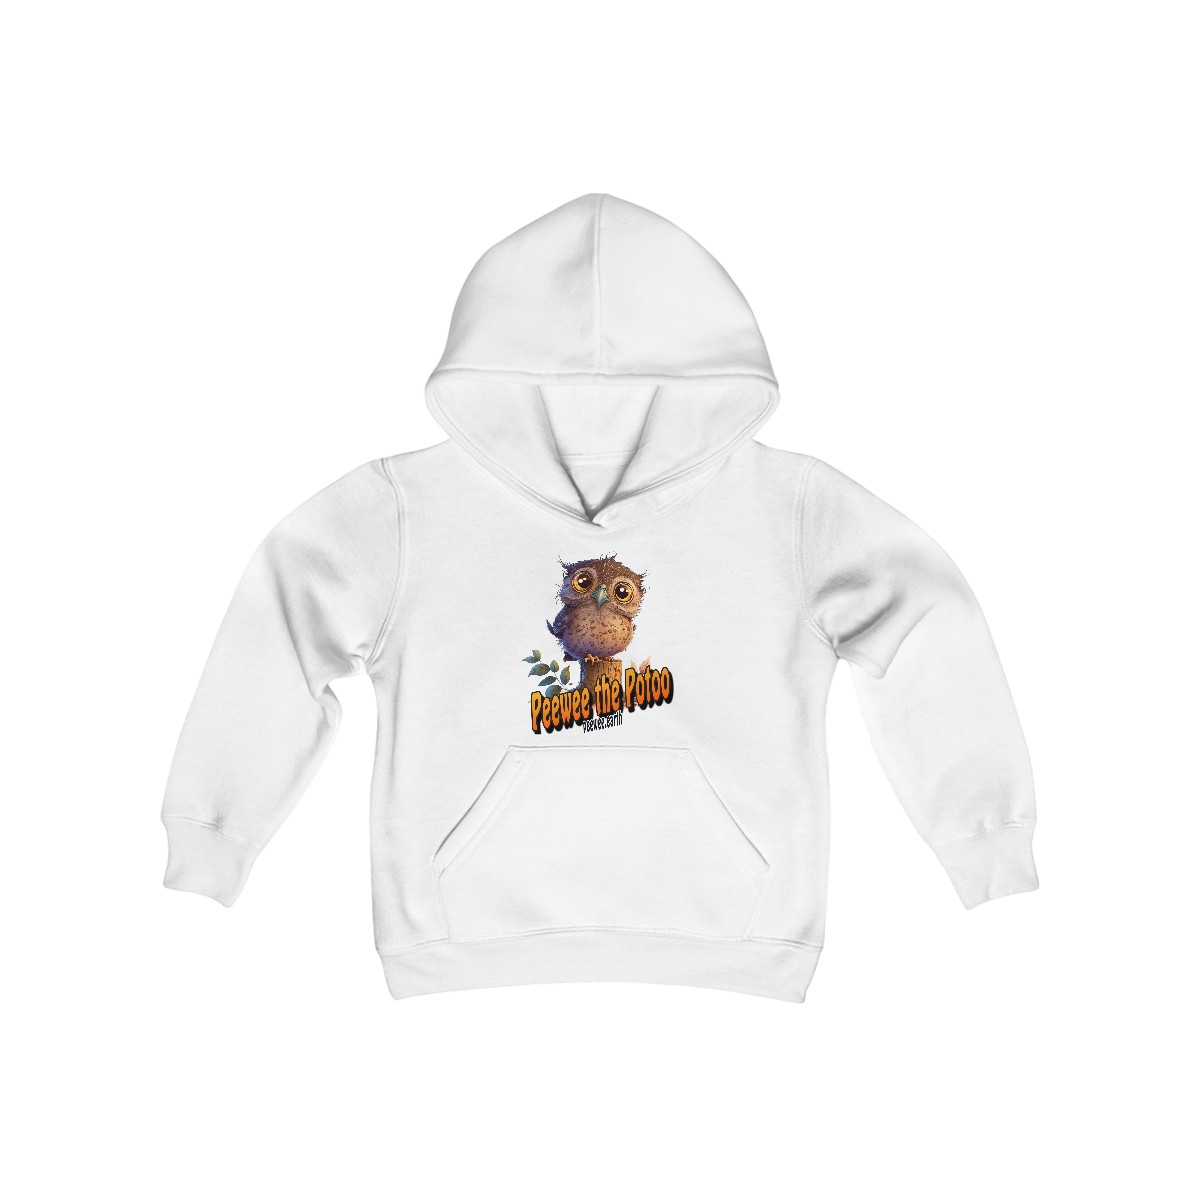 Official Peewee the Potoo youth hoodie - Cozy Peewee product main image